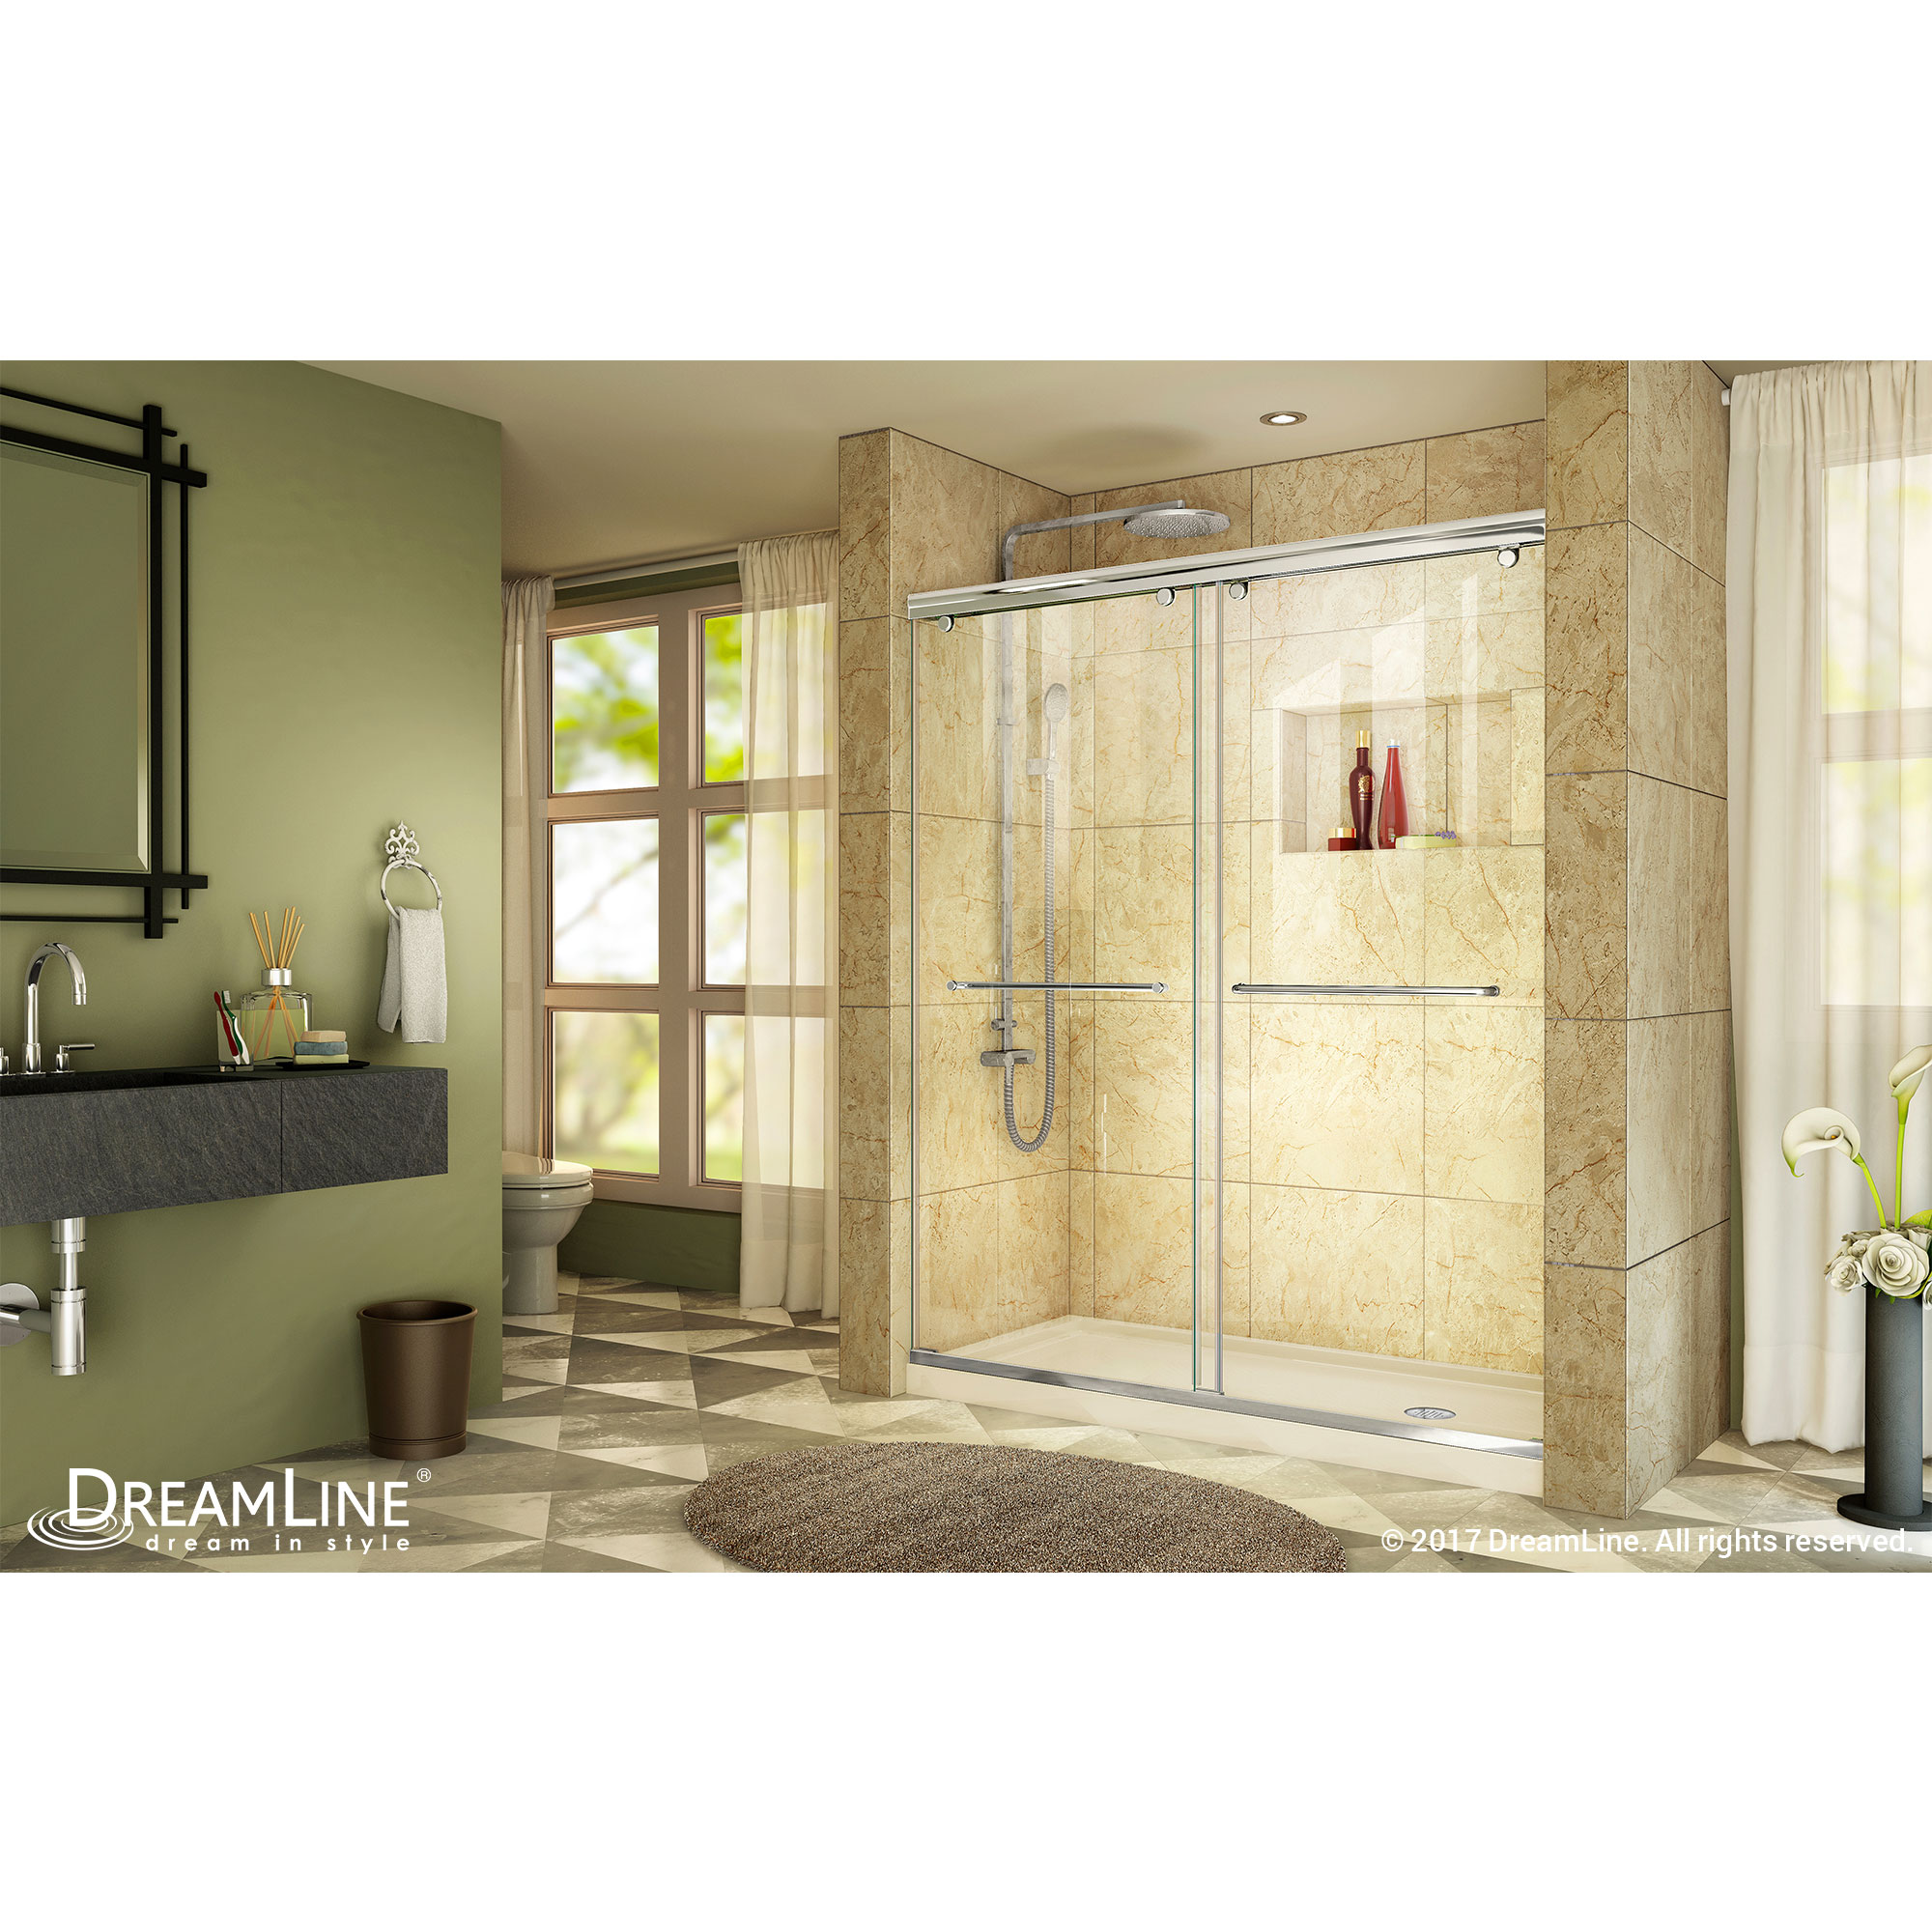 DreamLine Charisma 30 in. D x 60 in. W x 78 3/4 in. H Bypass Shower Door in Chrome with Right Drain Biscuit Base Kit